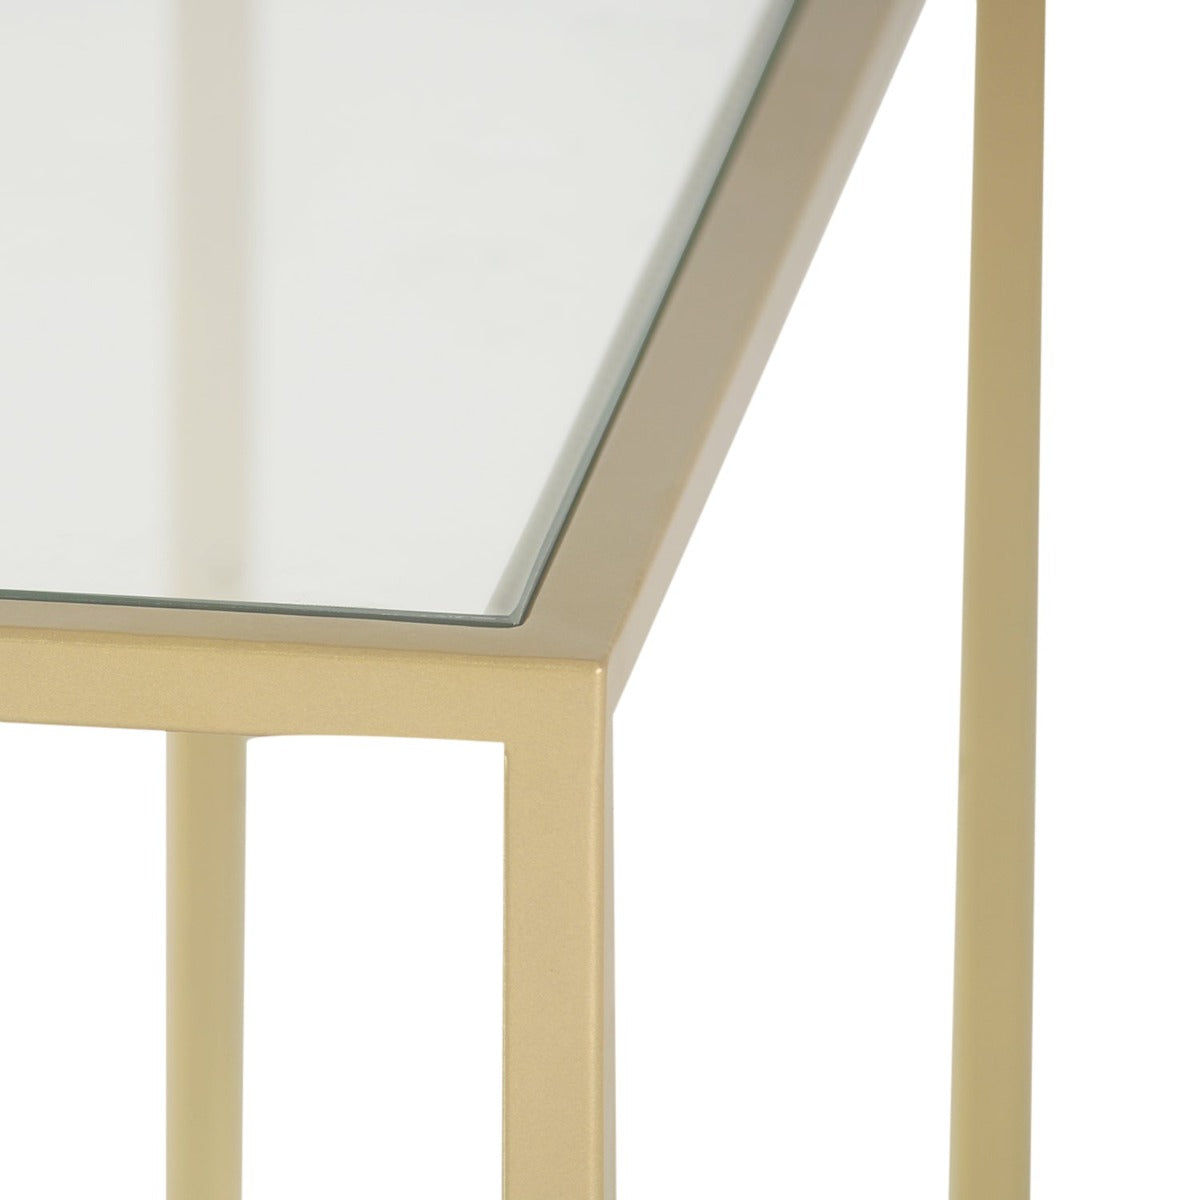 Osby Rectangle Glass Coffee Table In Gold Finish